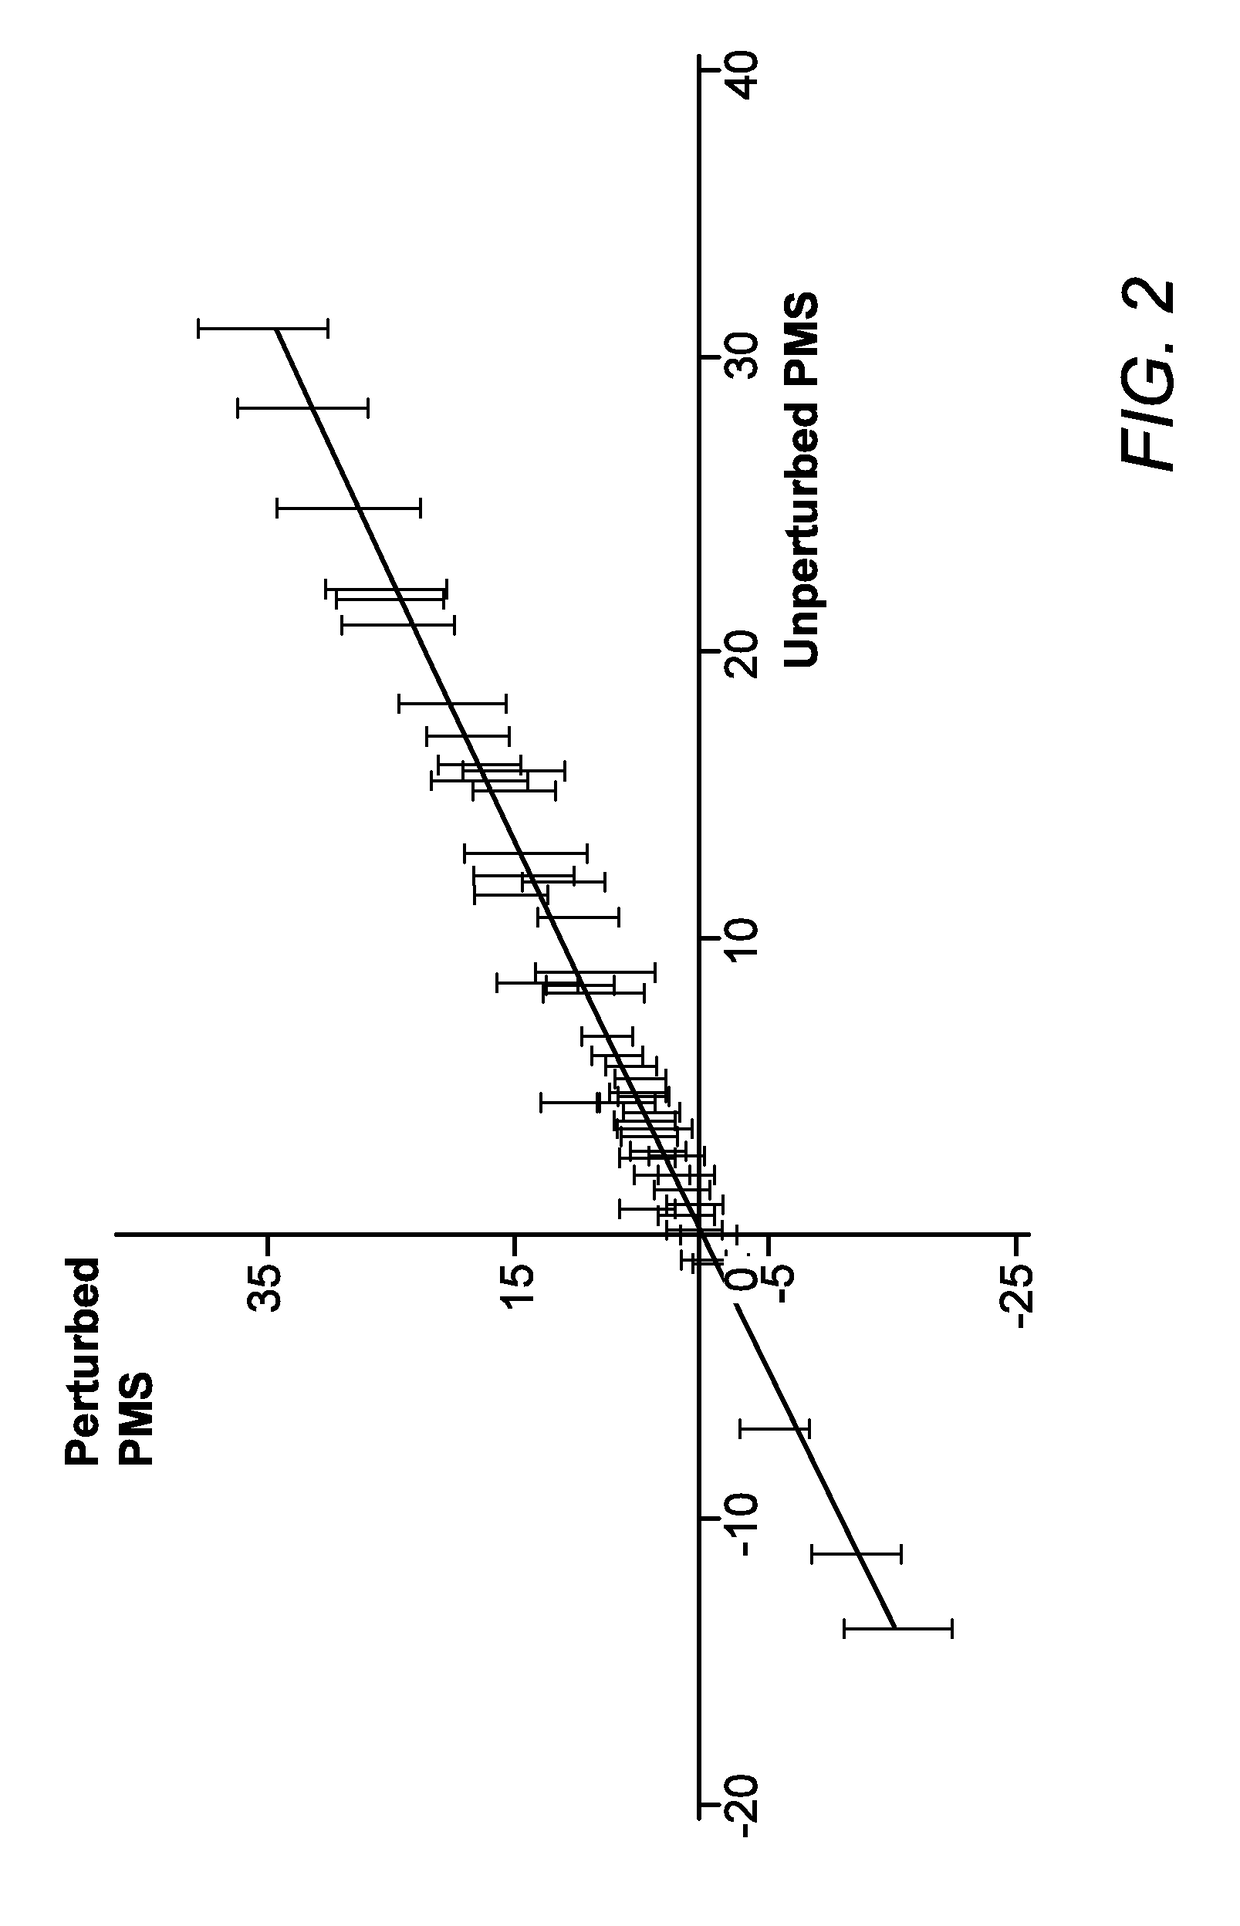 System, method and software for analysis of intracellular signaling pathway activation using transcriptomic data